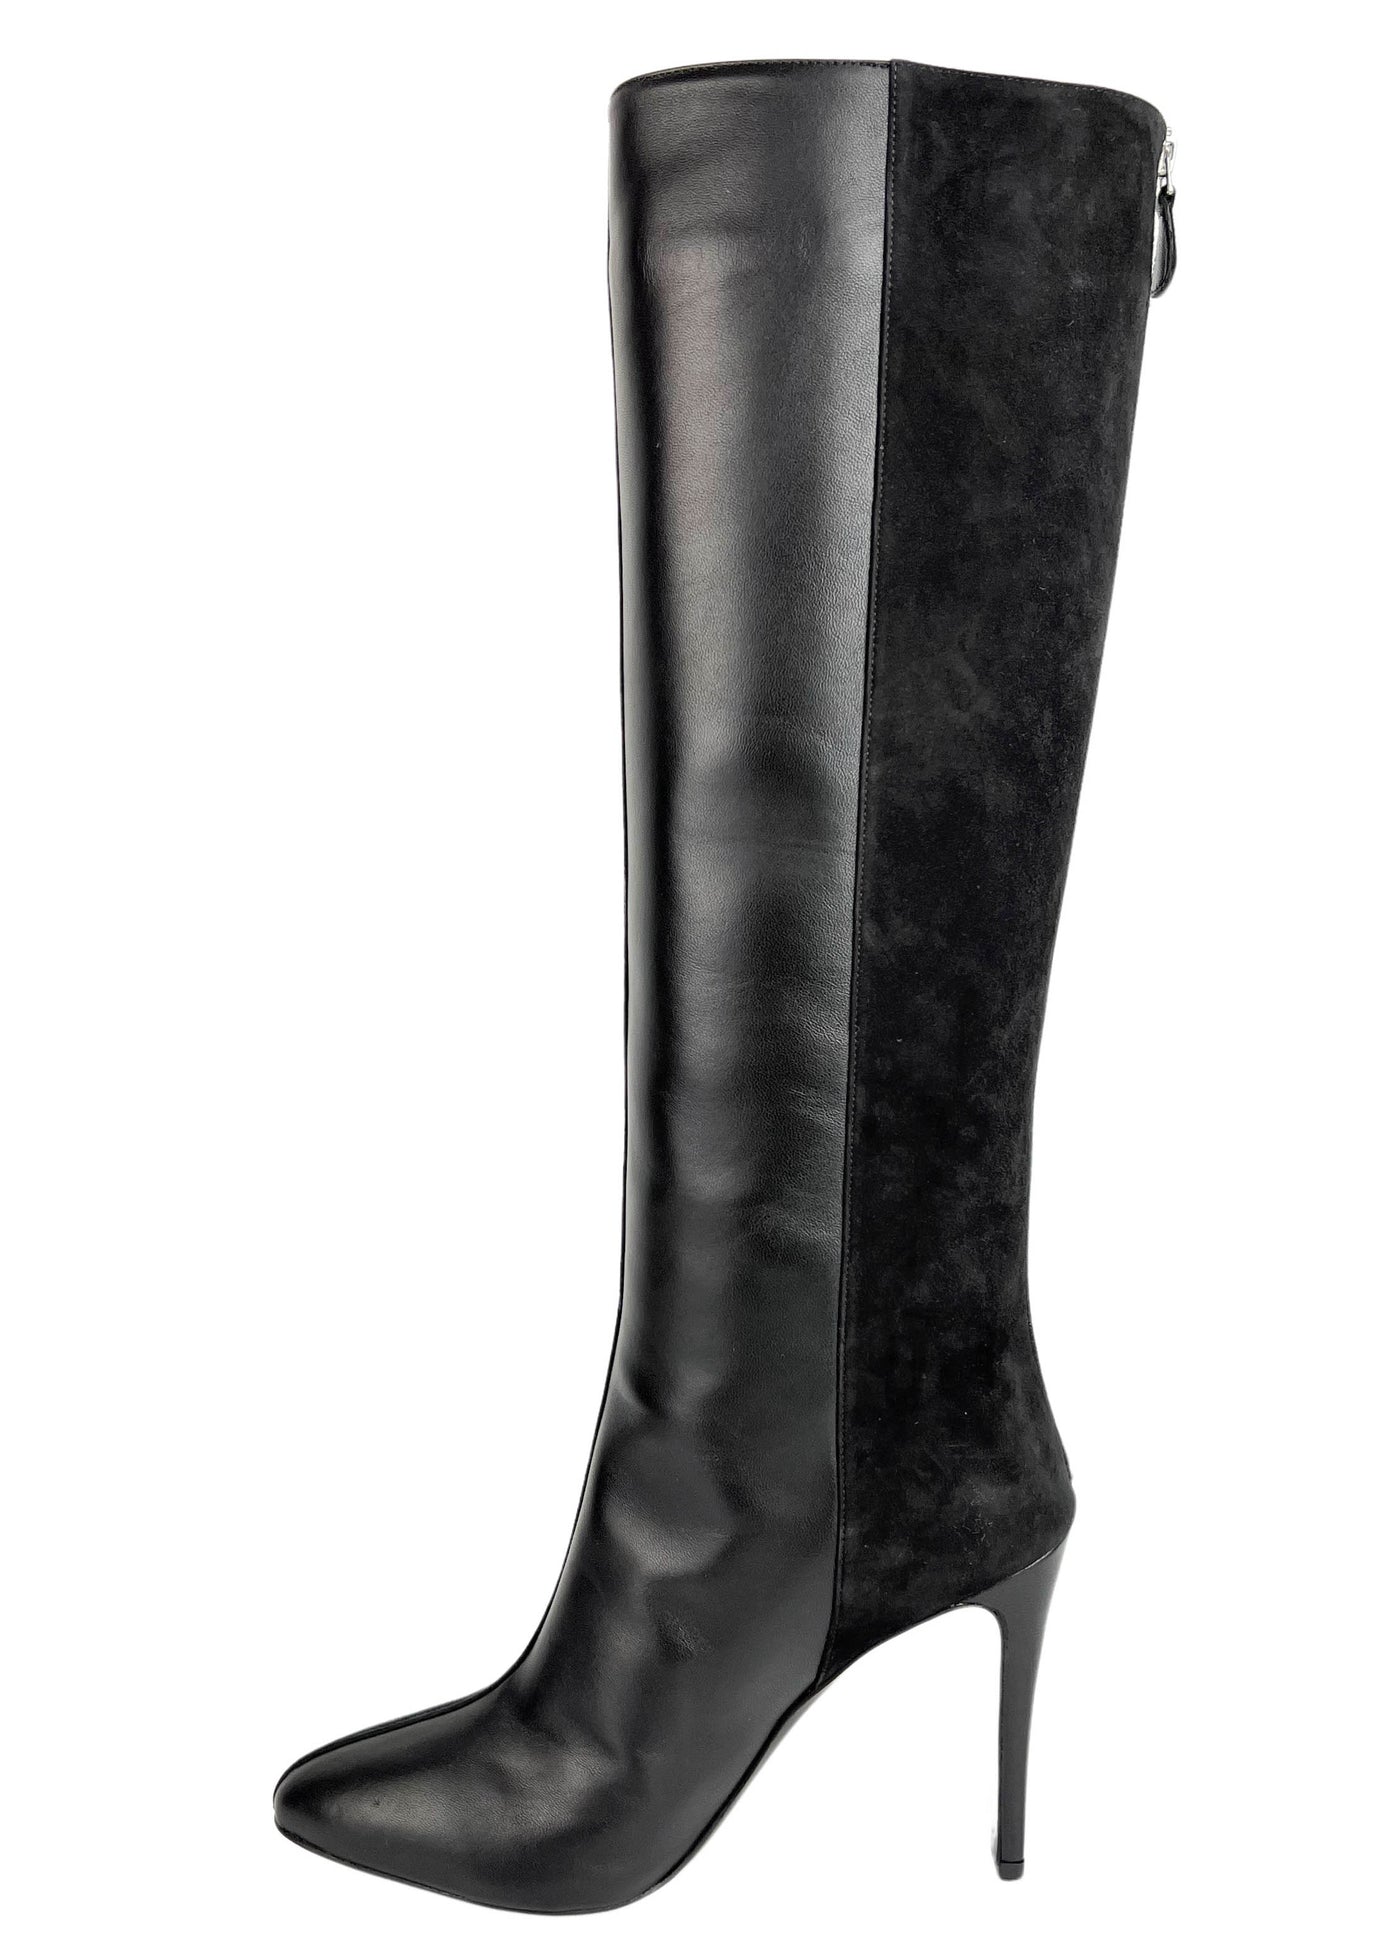 Laurence Dacade Eden Boots in Black - Discounts on Laurence Dacade at UAL